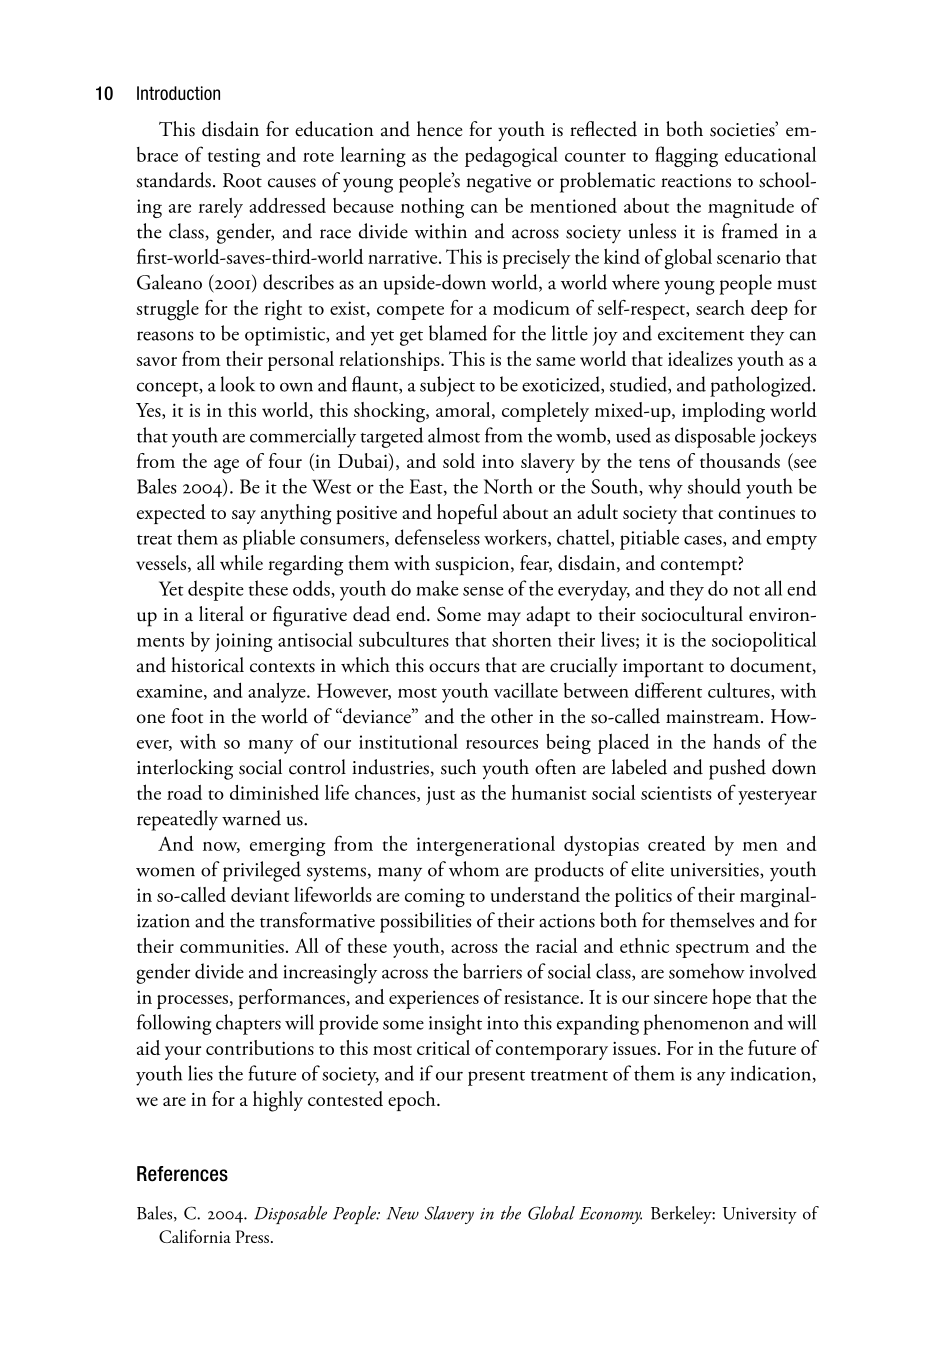 Globalizing the Streets: Cross-Cultural Perspectives on Youth, Social Control, and Empowerment page 10